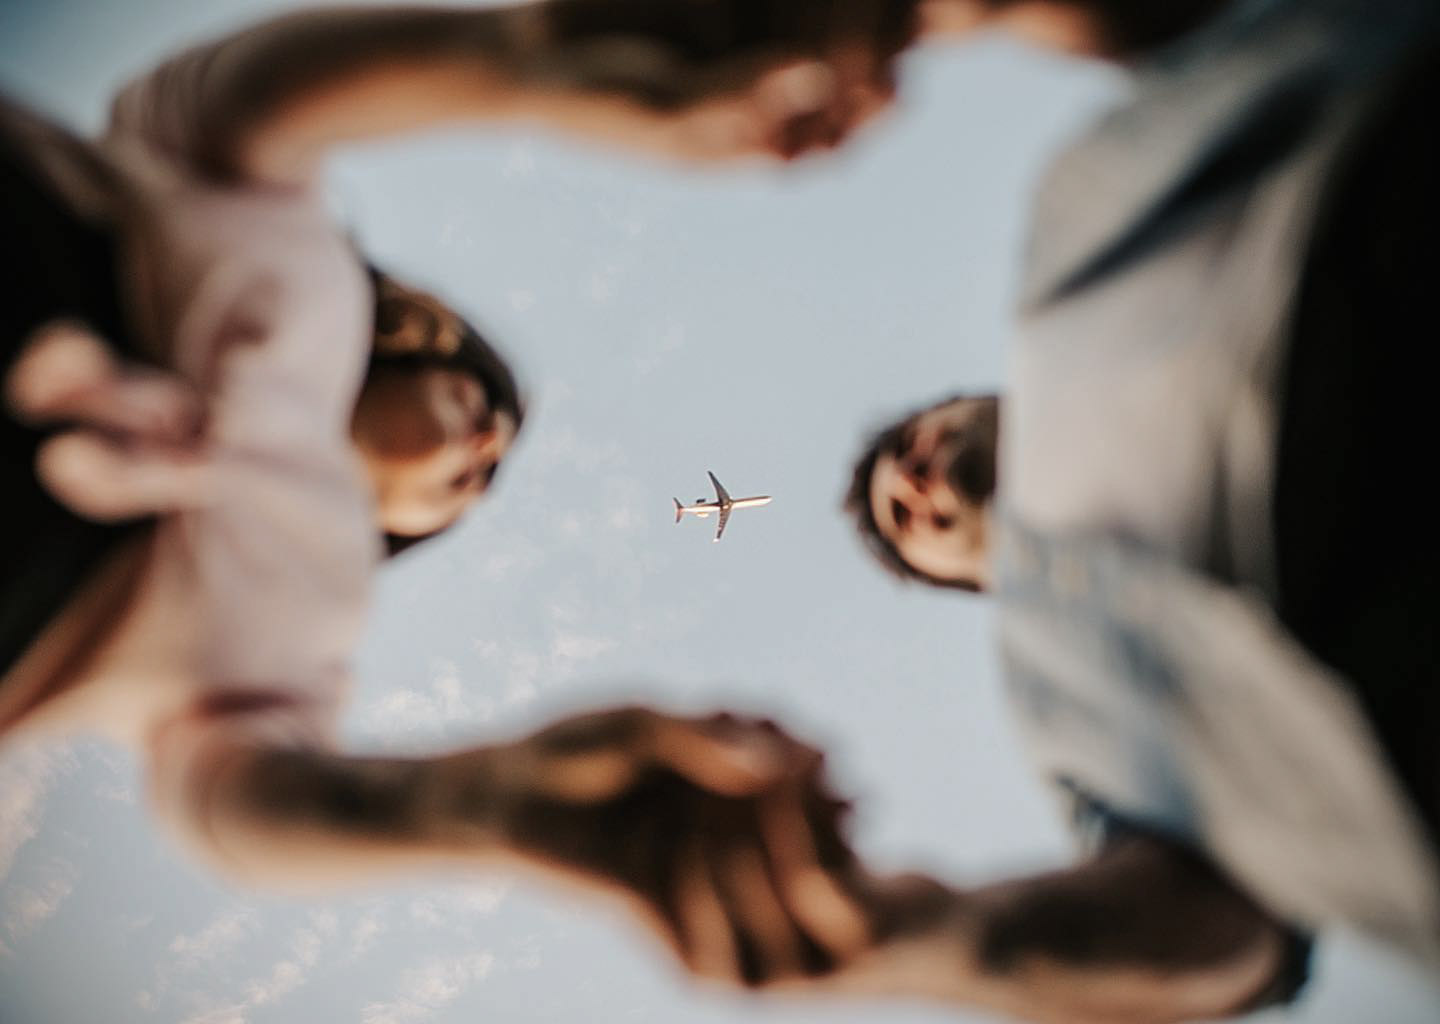 a moles eye view of a off focus couple holding hands while a plane is flying above them